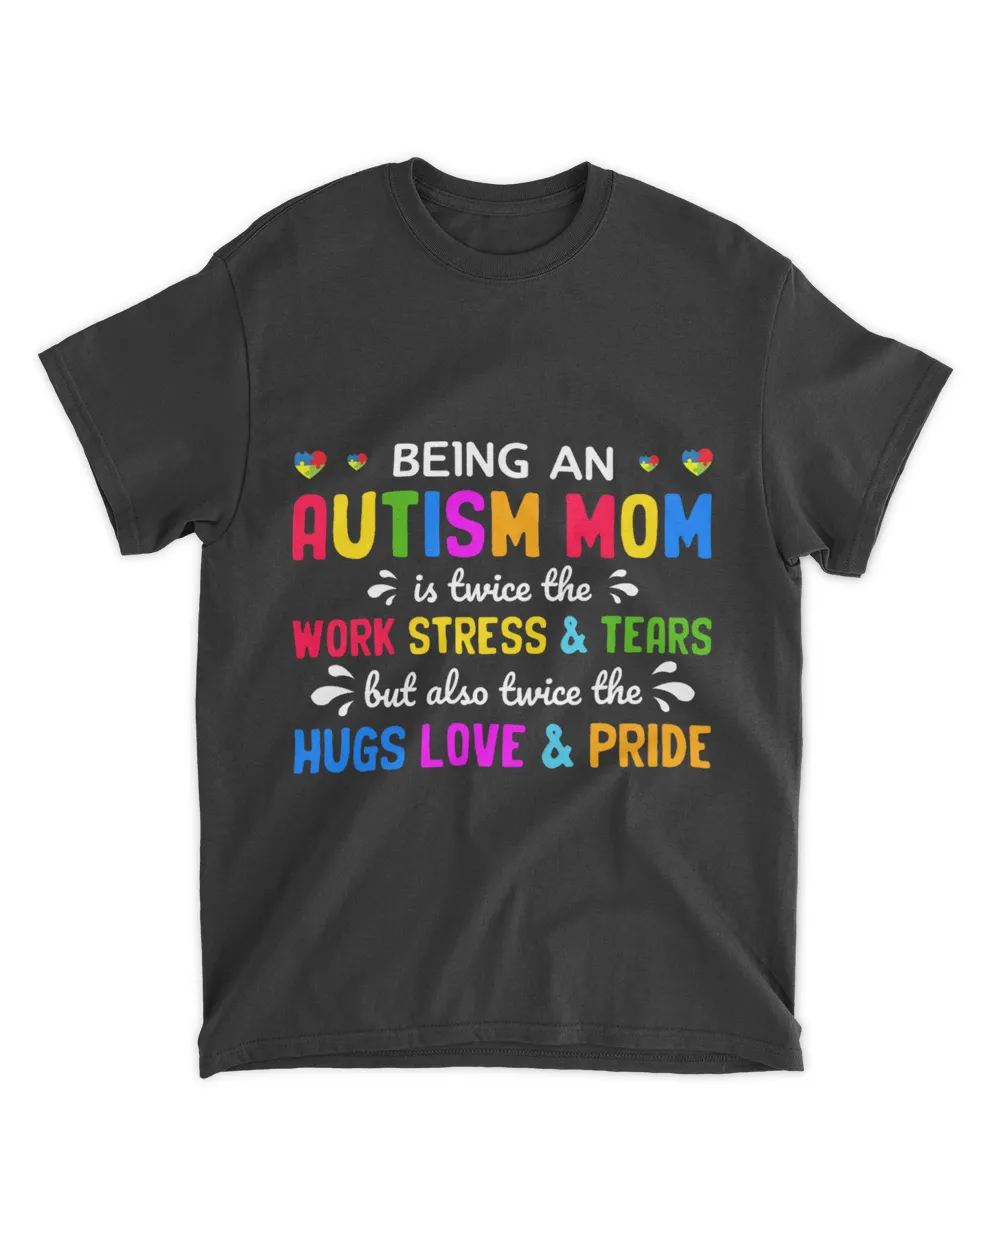 Being An Autism Mom Is Twice The Work Stress 2Tears But